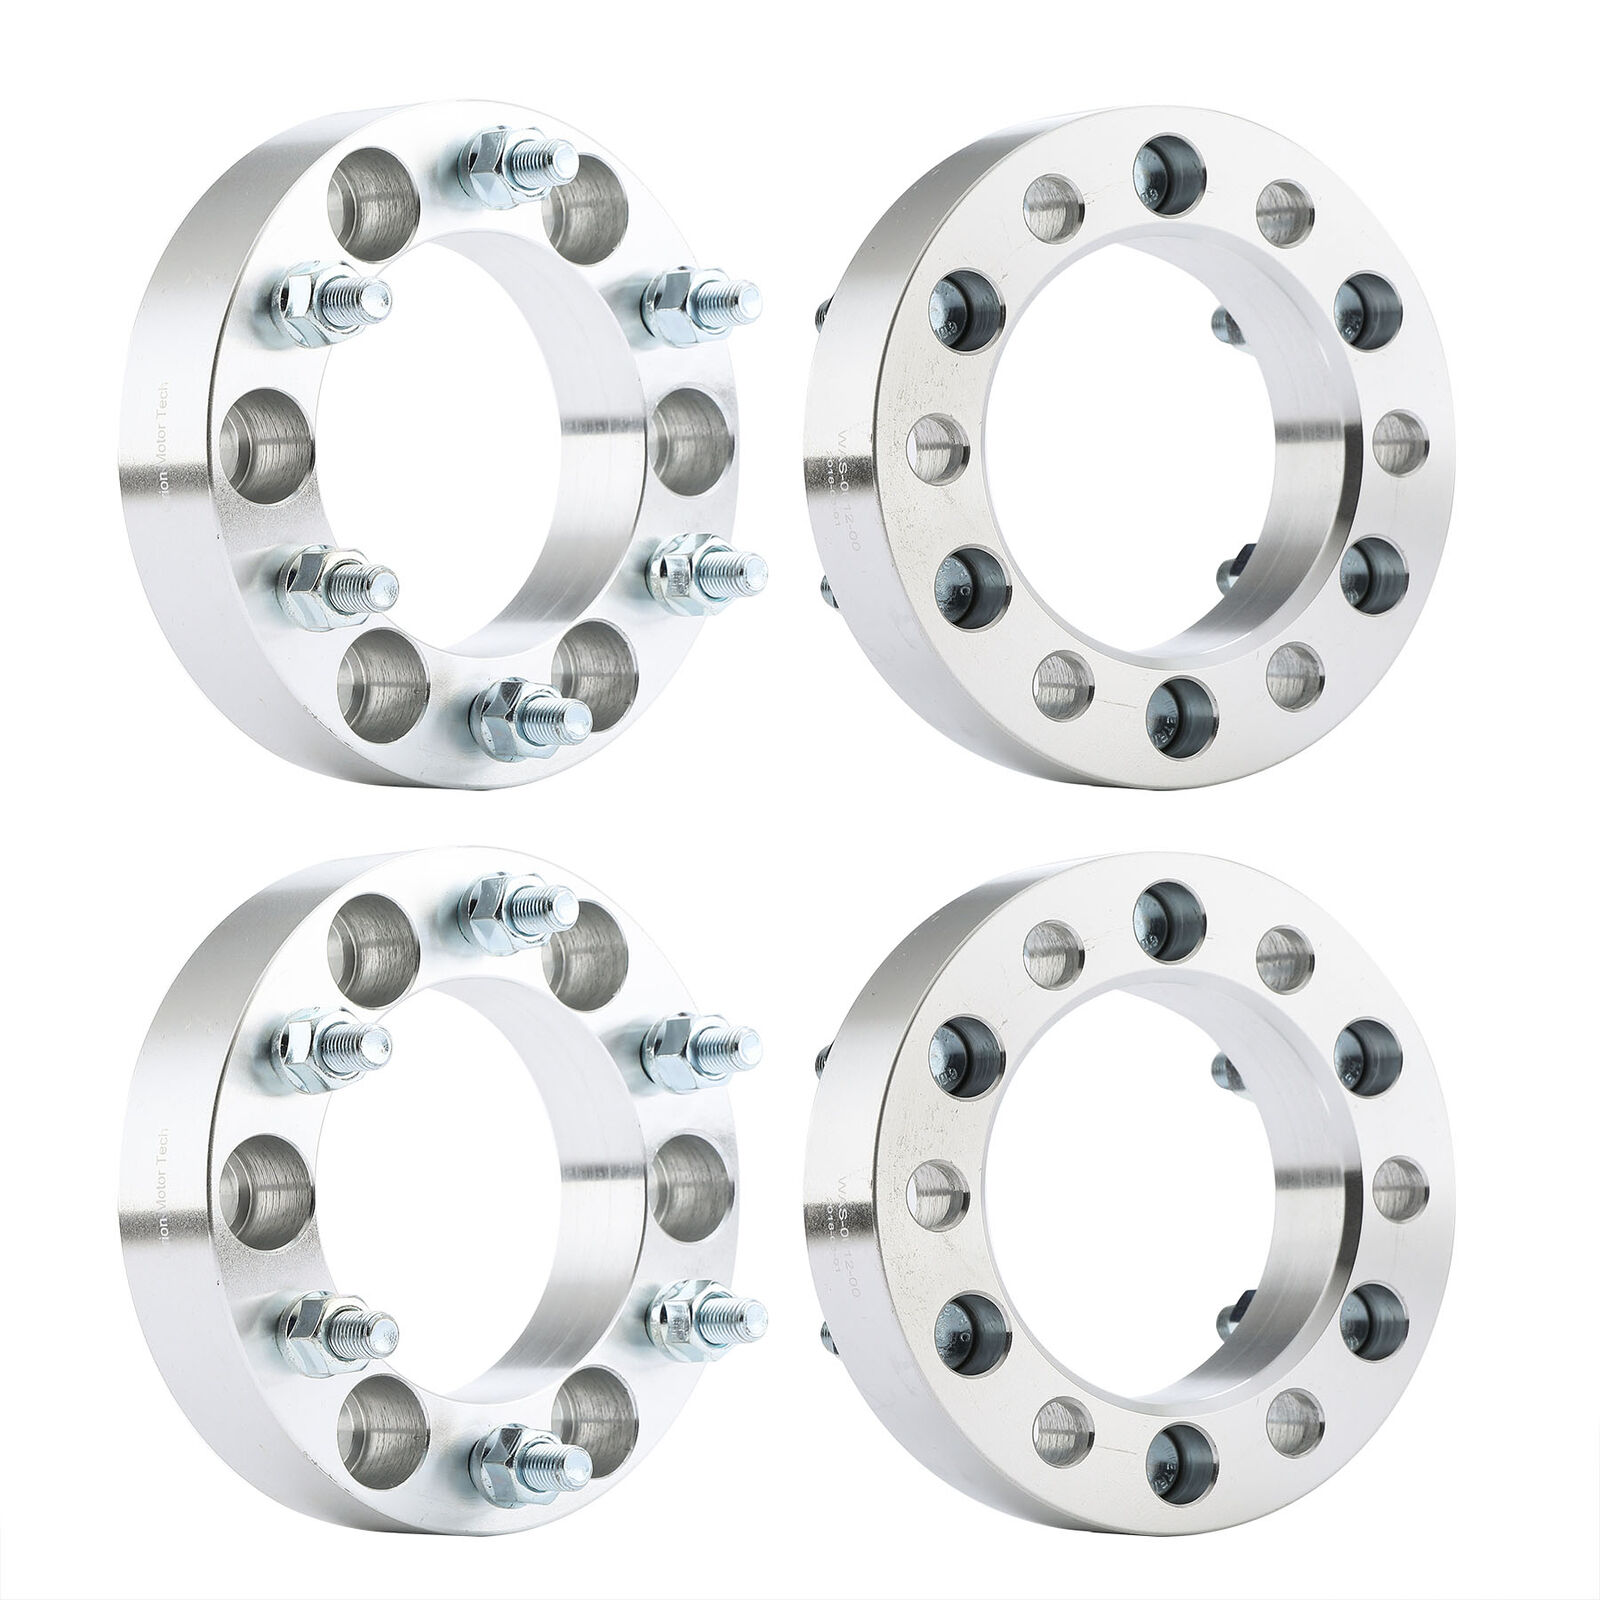 OMT 4pcs 1.5 Inch Wheel Spacers 6X5.5 12x1.5'' FIT TACOMA 4 RUNNER ONLY 6 LUGS